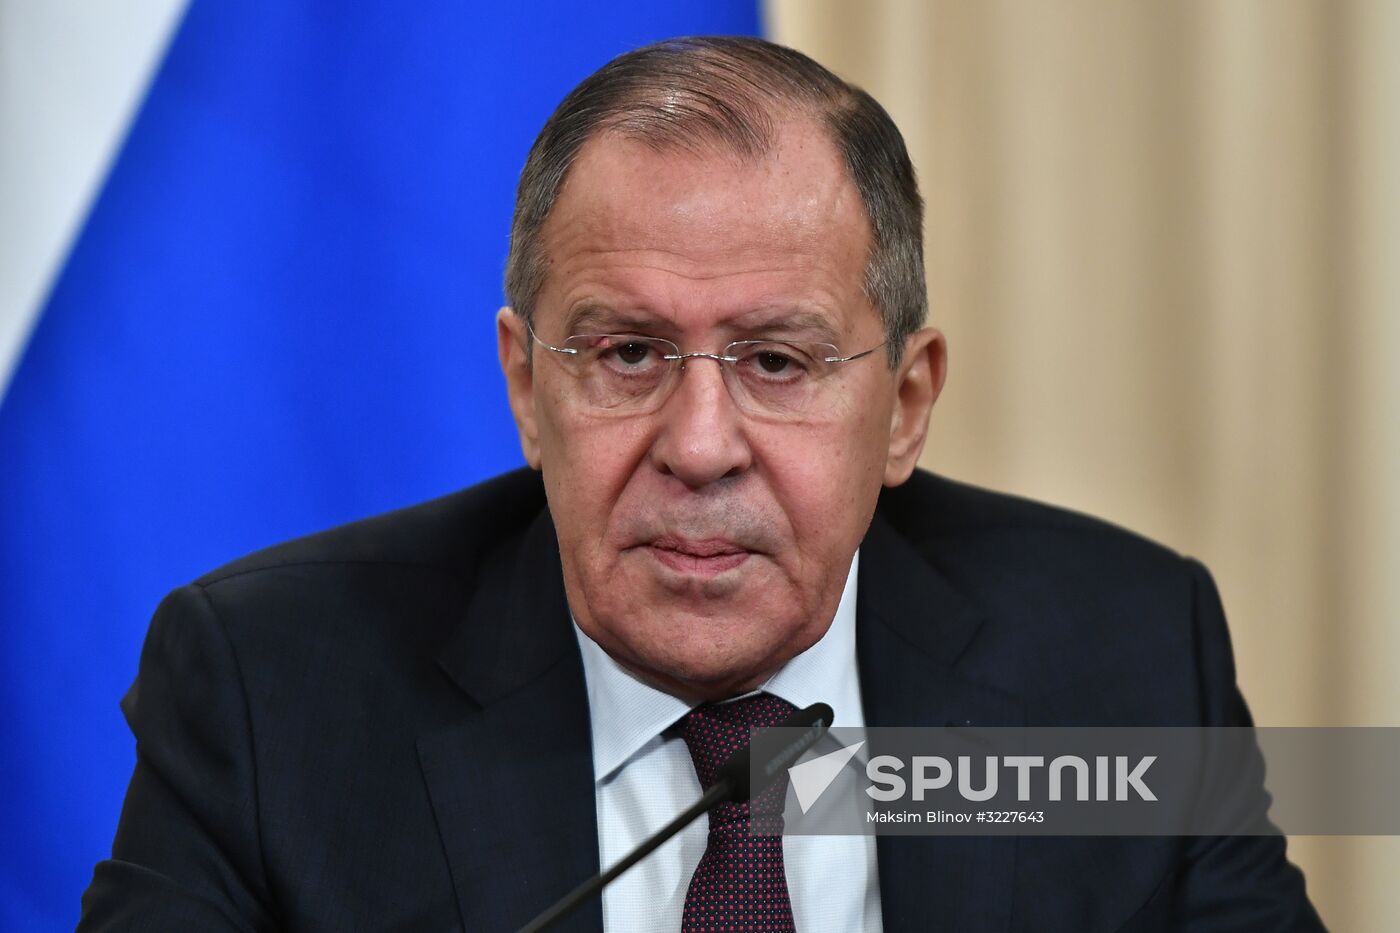 Russian Foreign Minister Sergei Lavrov meets with OSCE Secretary General Thomas Greminger